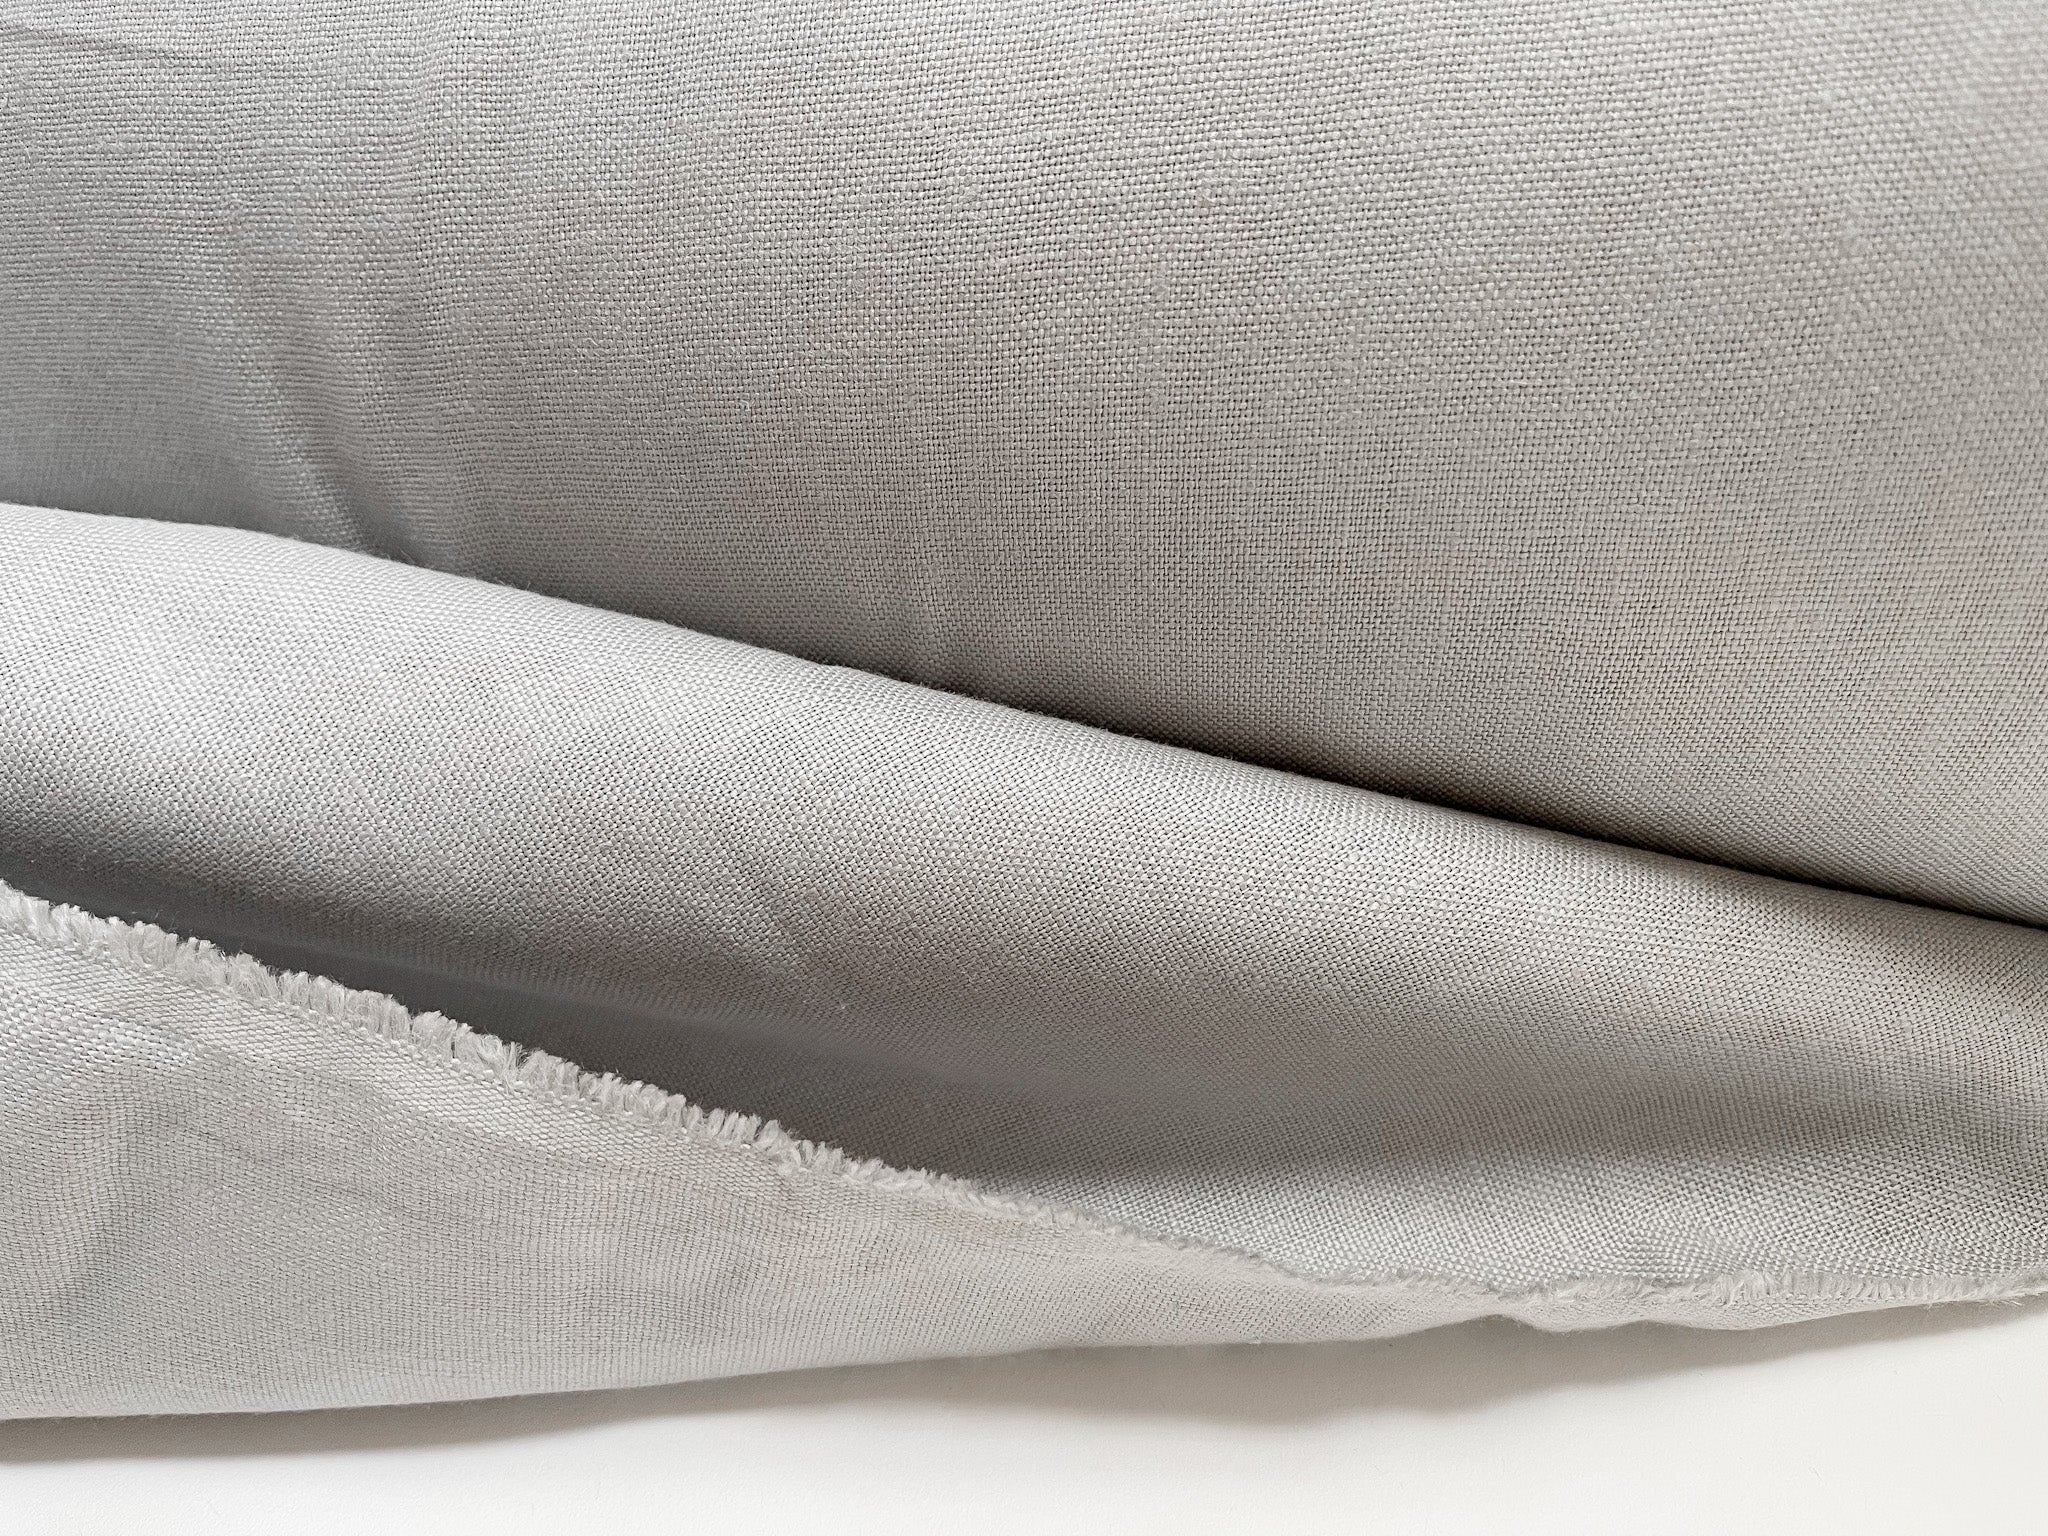 very light GREY and white linen Fabric